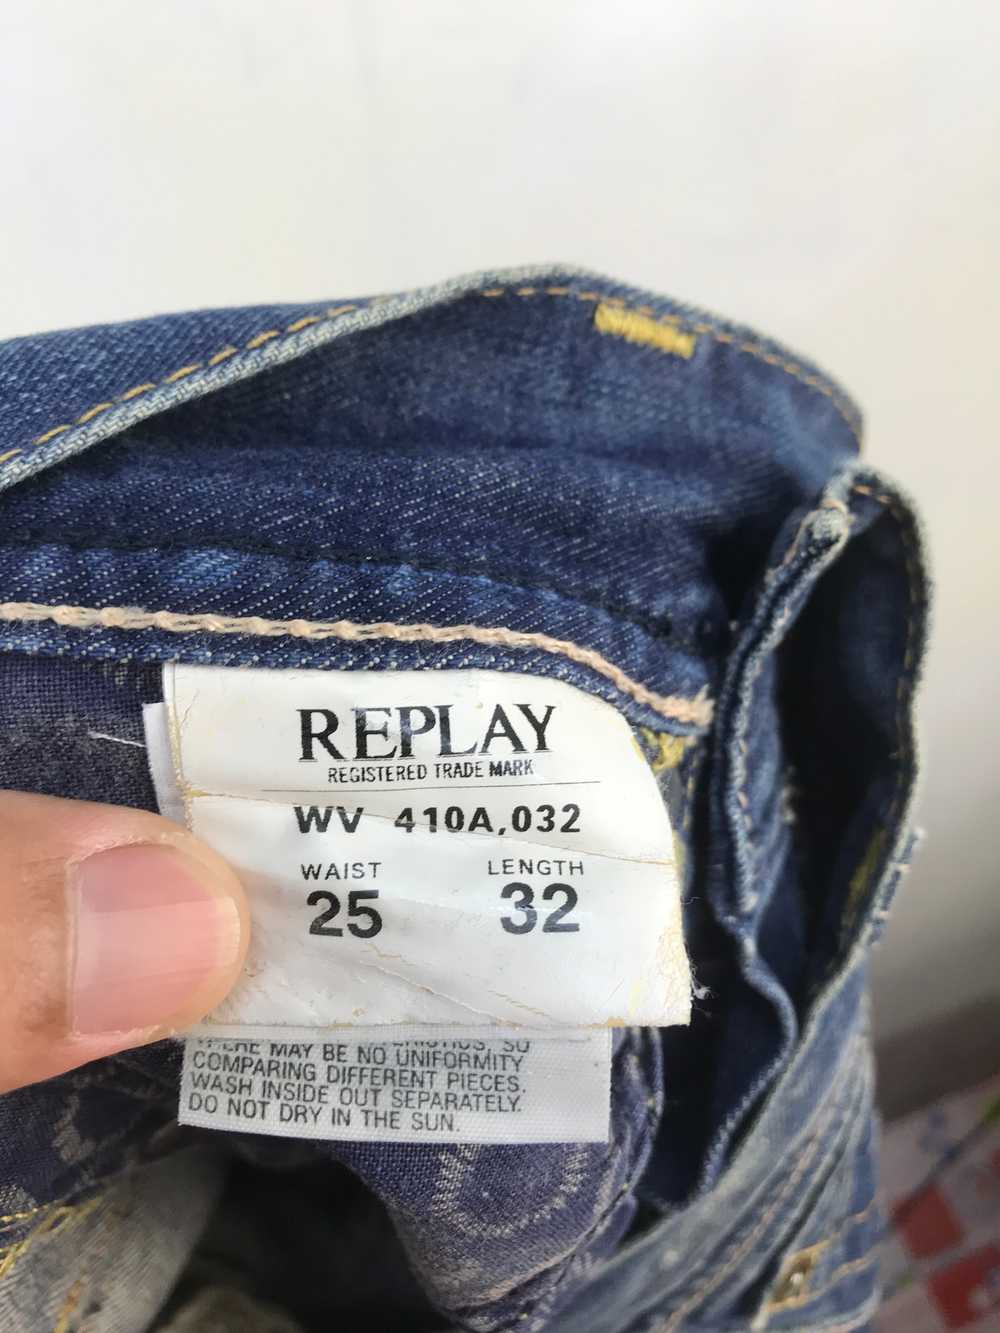 Replay - REPLAY DENIM BOOTCUT STYLE JEANS - image 7